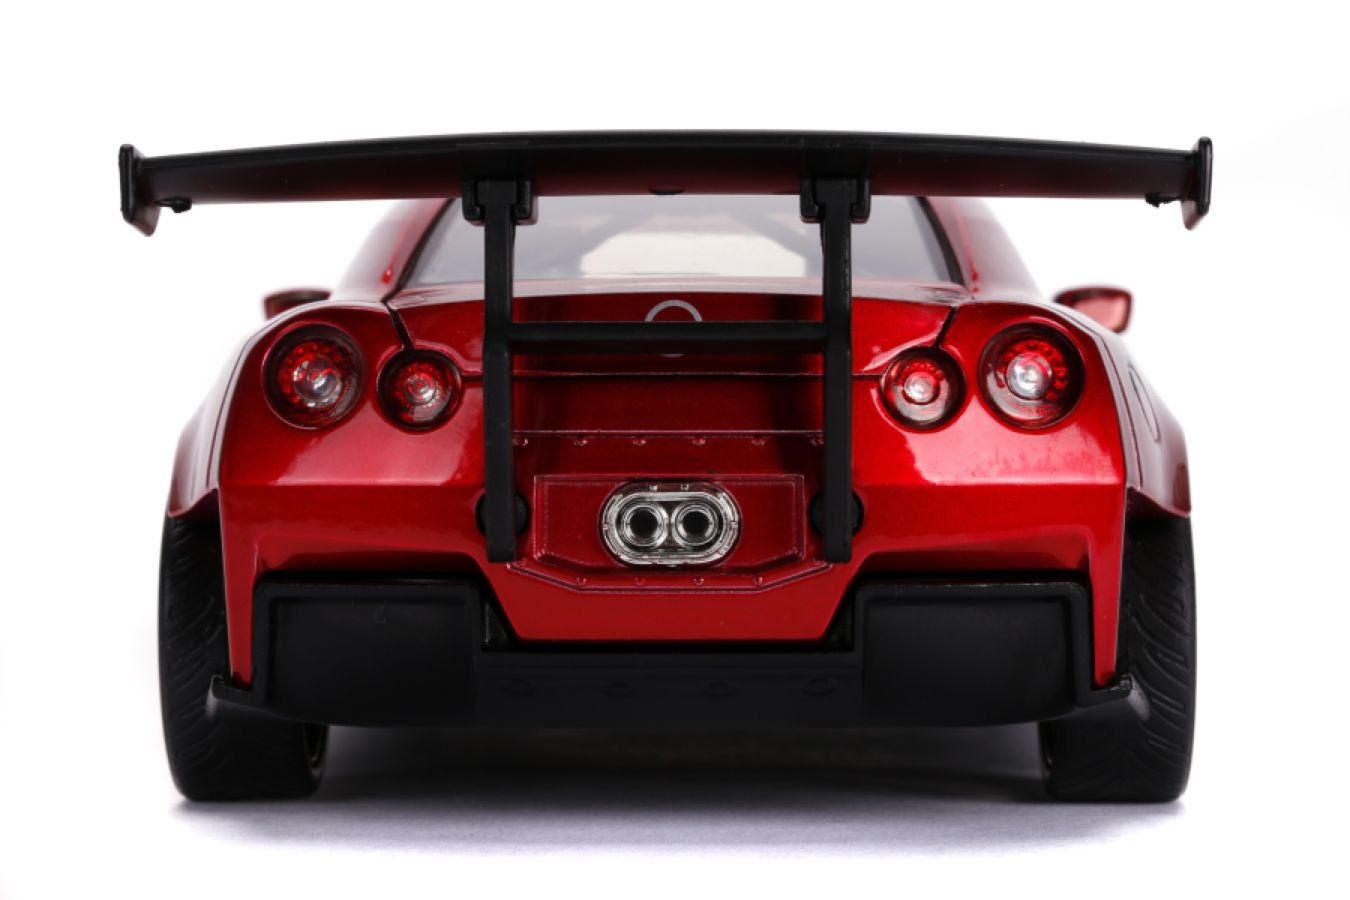 Power Rangers - '09 Nissan GT-R Red 1:24 Scale Hollywood Ride